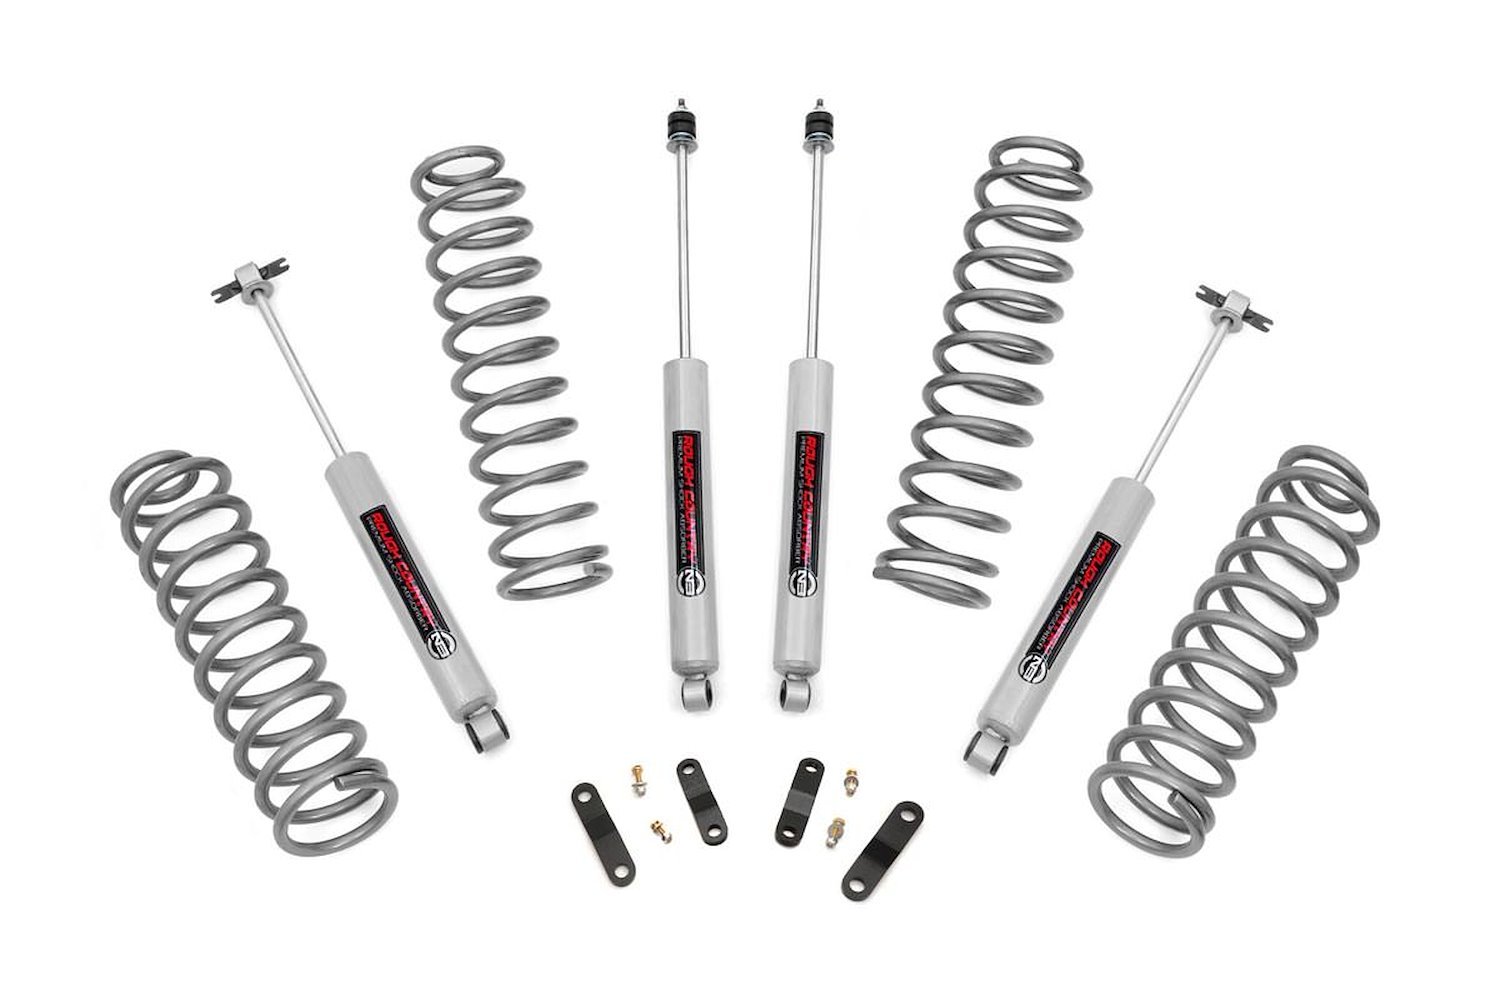 PERF678 Front and Rear Suspension Lift Kit, Lift Amount: 2.5 in. Front/2.5 in. Rear